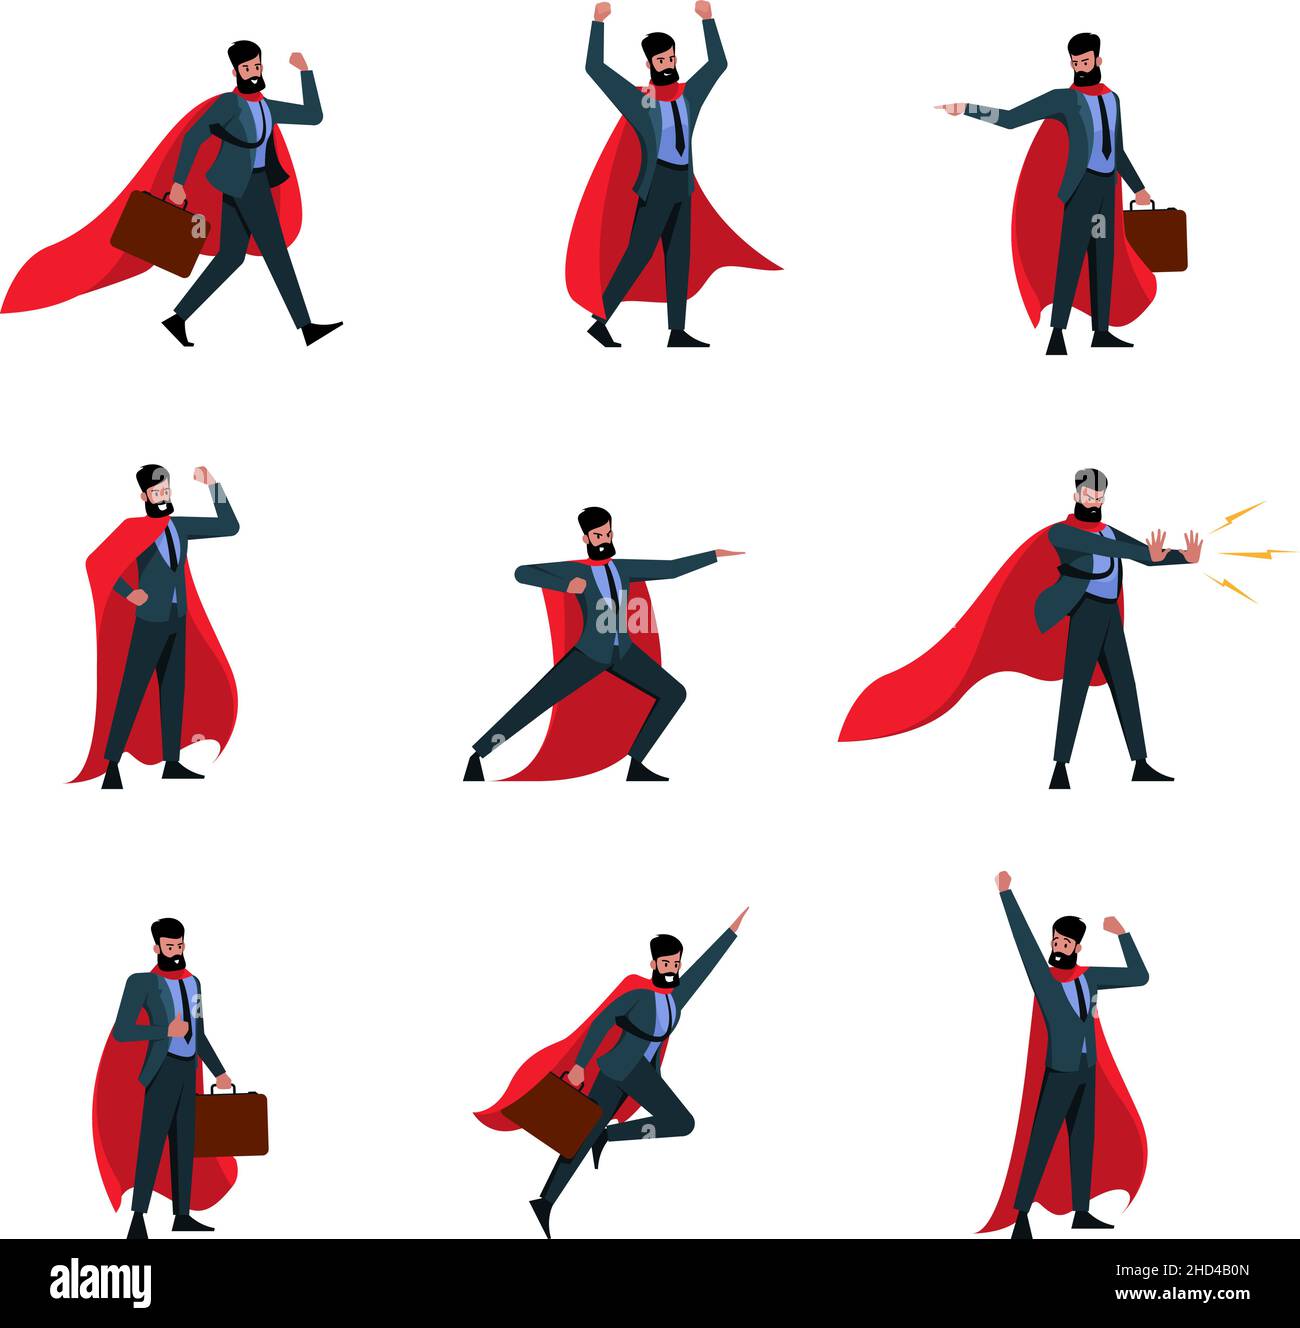 Business heroes. Flying man in red cape power action poses of businessman characters garish vector illustrations in cartoon style isolated Stock Vector